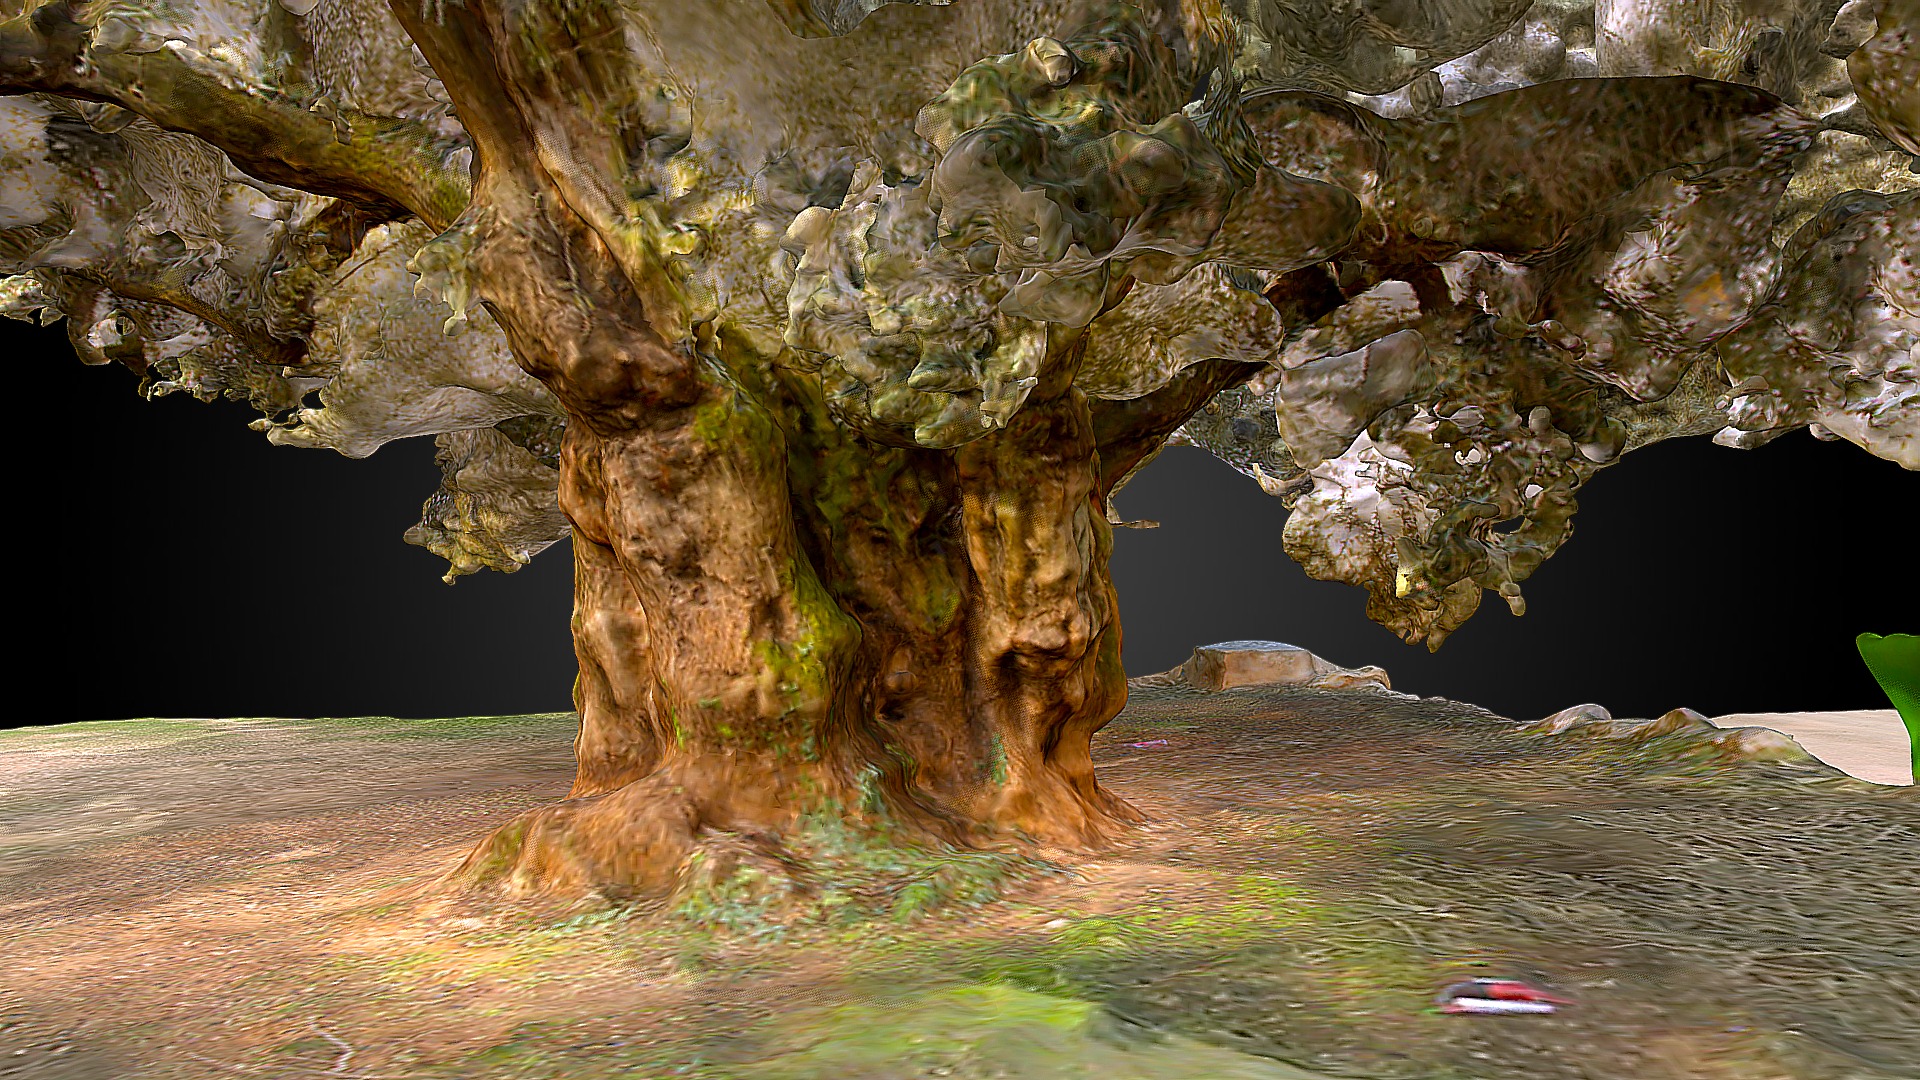 3D model Thousand-year-old olive (Olea europaea) – Godall - This is a 3D model of the Thousand-year-old olive (Olea europaea) - Godall. The 3D model is about a cave with a body of water in it.